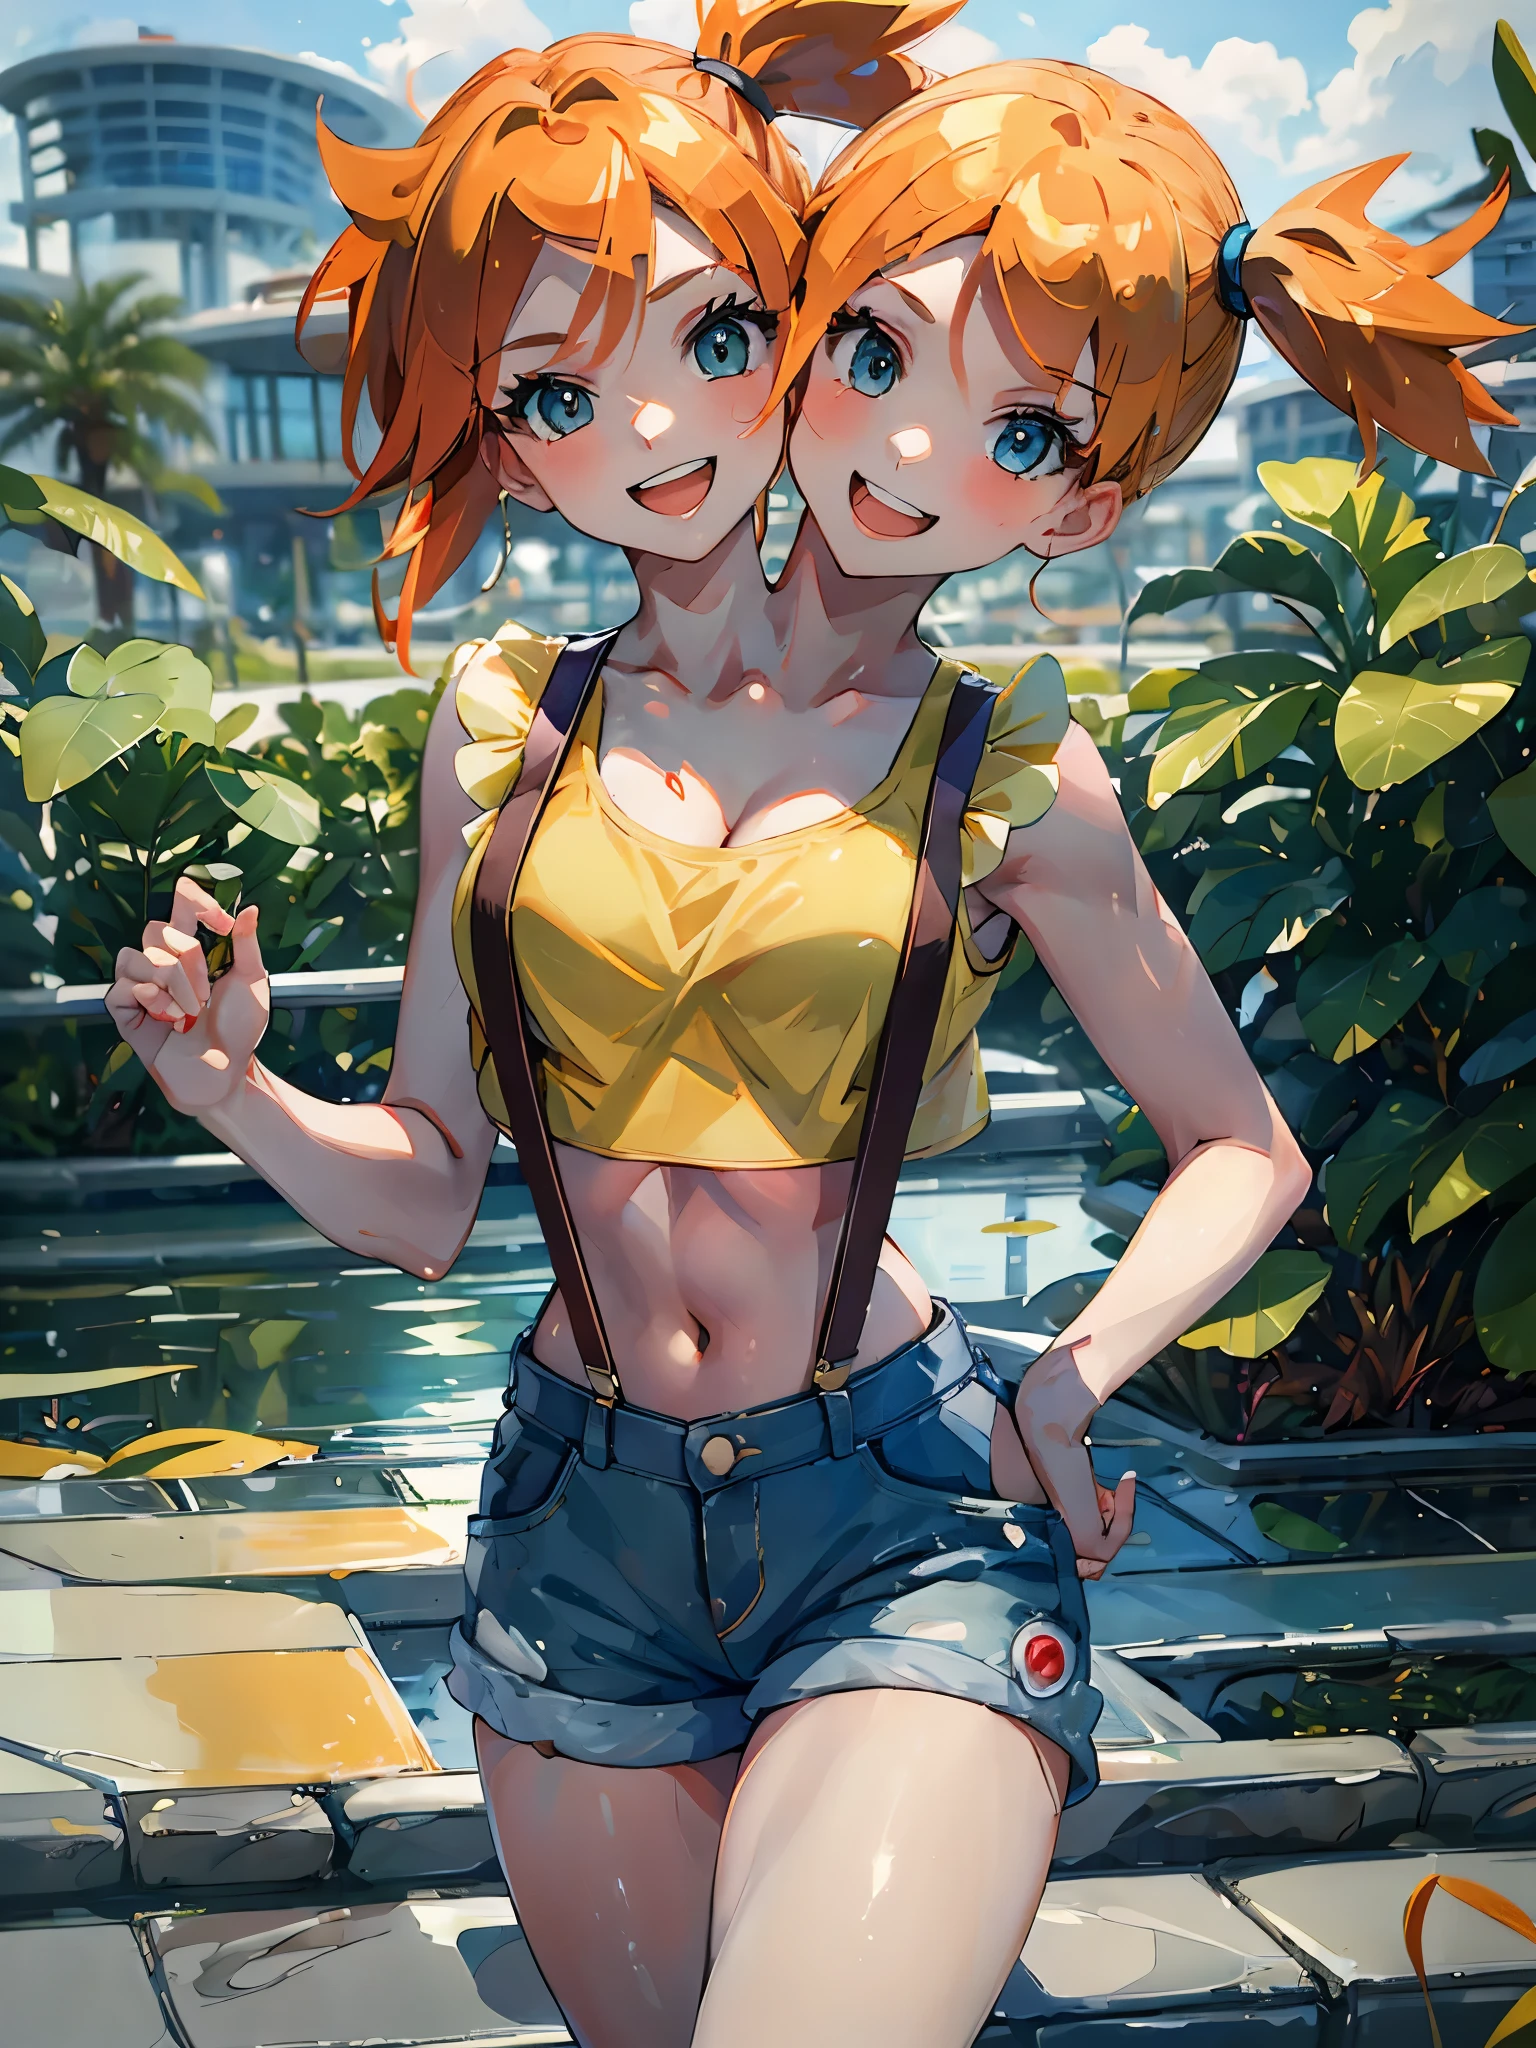 (masterpiece, best quality), best resolution, (2heads:1.5), 1girl, misty , Misty_Pokemon, yellow crop top, suspenders, side ponytail, orange hair, denim shorts, aquamarine eyes, smile, open mouth, facing the viewer, posing for the camera, outdoors, convention center fountain